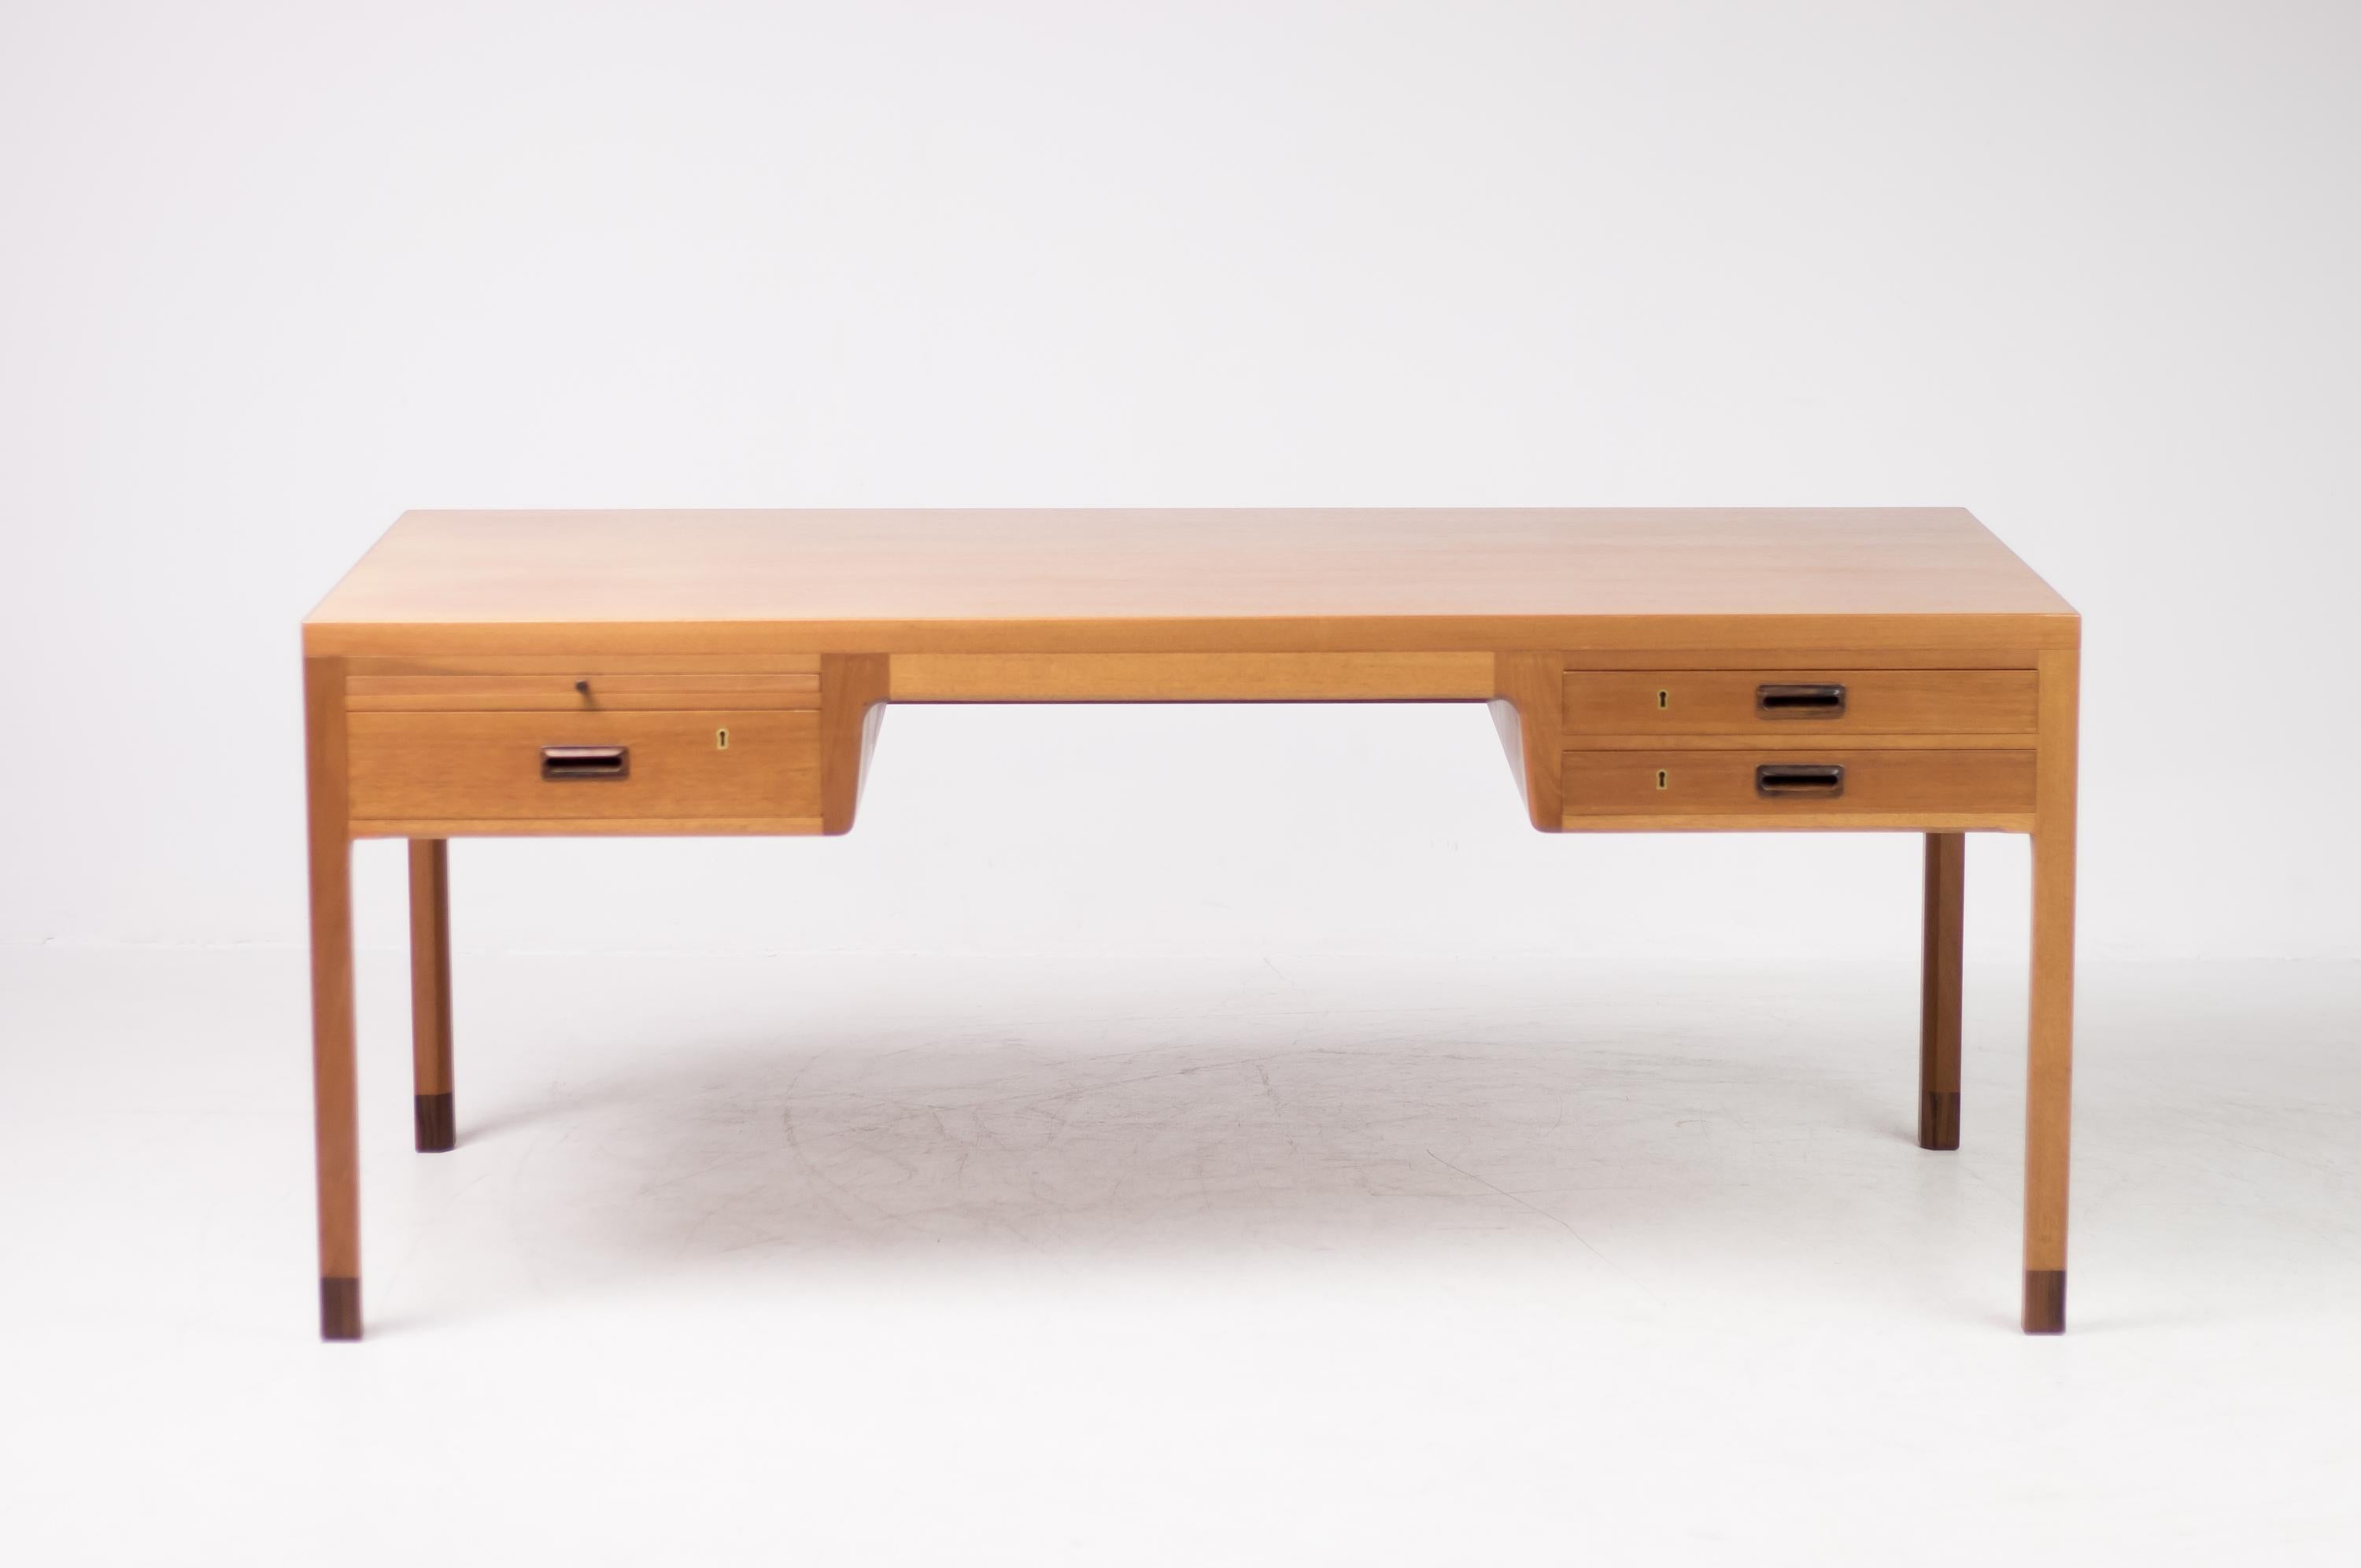 Beautiful desk designed by Ejnar Larsen and Aksel Bender Madsen, made by Danish cabinetmaker Willy Beck in the 1950s.
A superb, generously scaled and impeccably hand crafted desk in pale mahogany having a finely proportioned rectilinear form. The